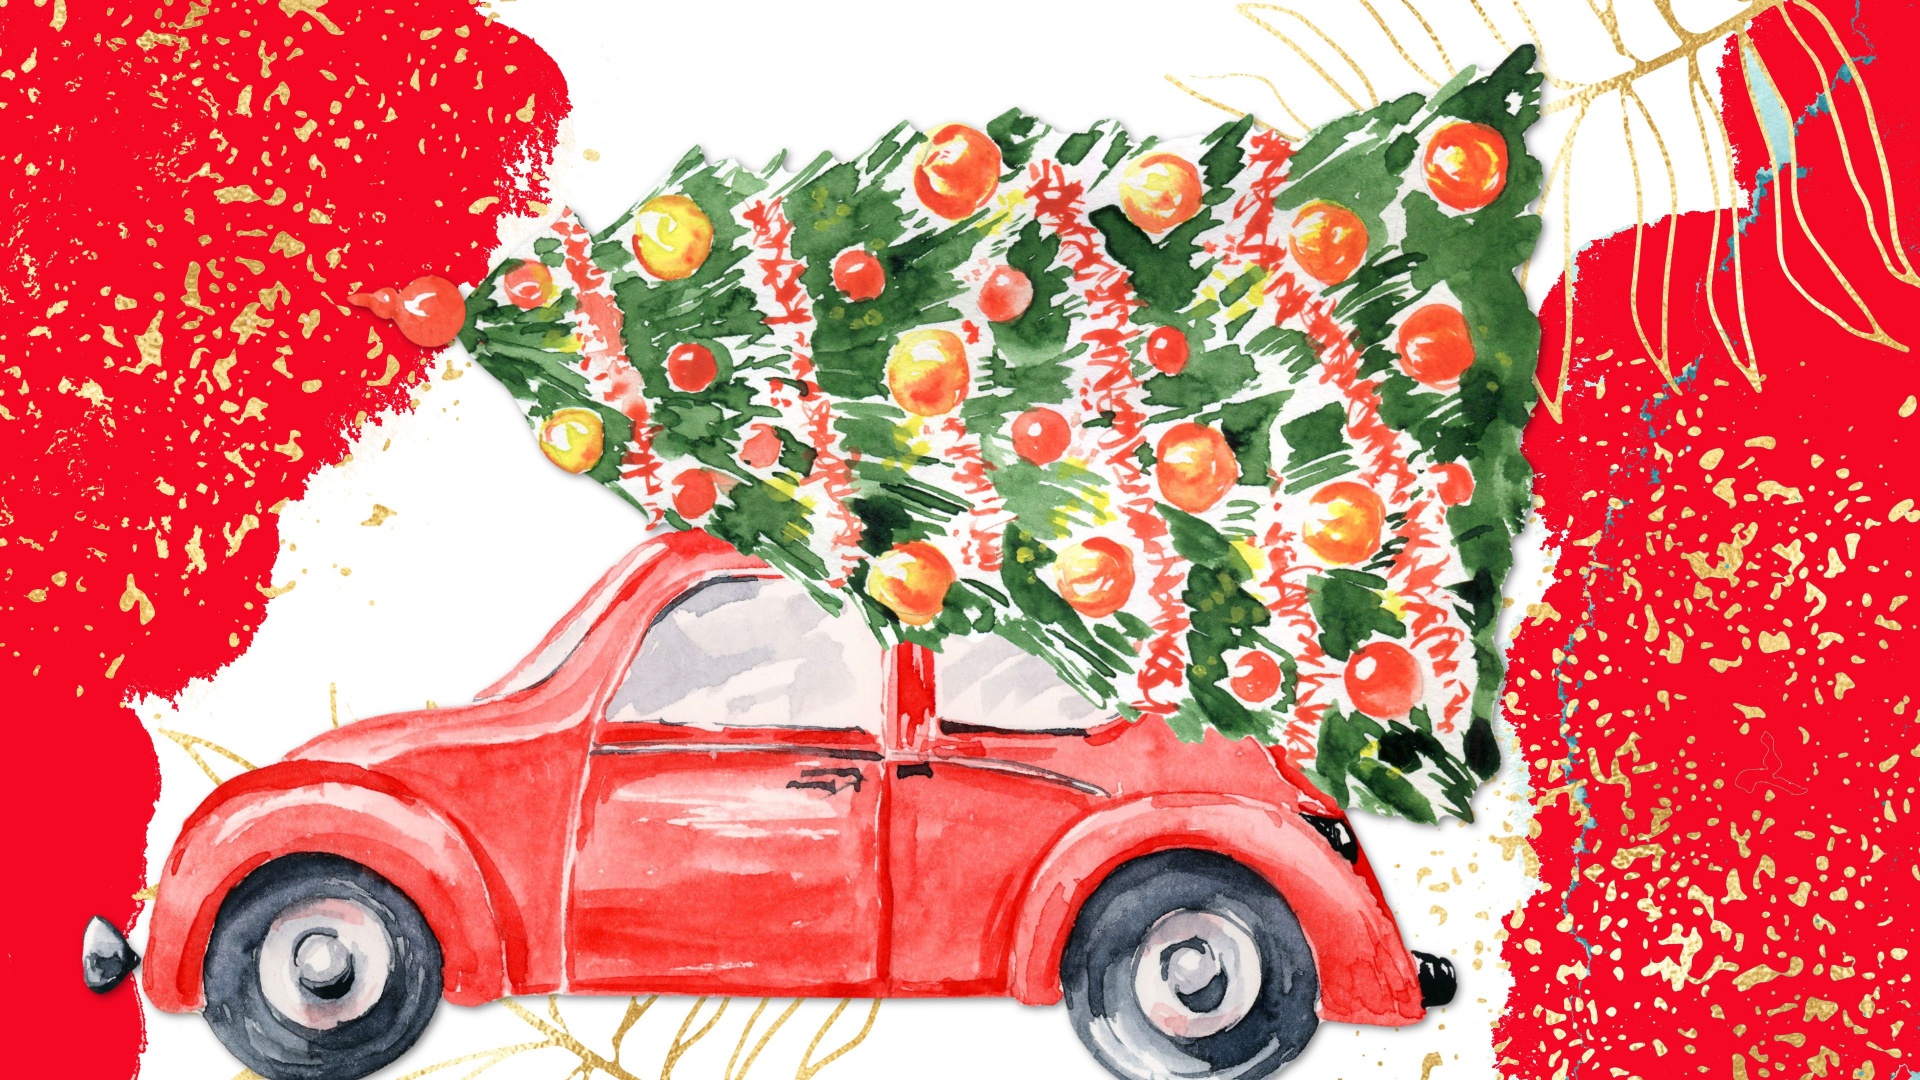 red volkswagen beetle with a large Christmas tree on top